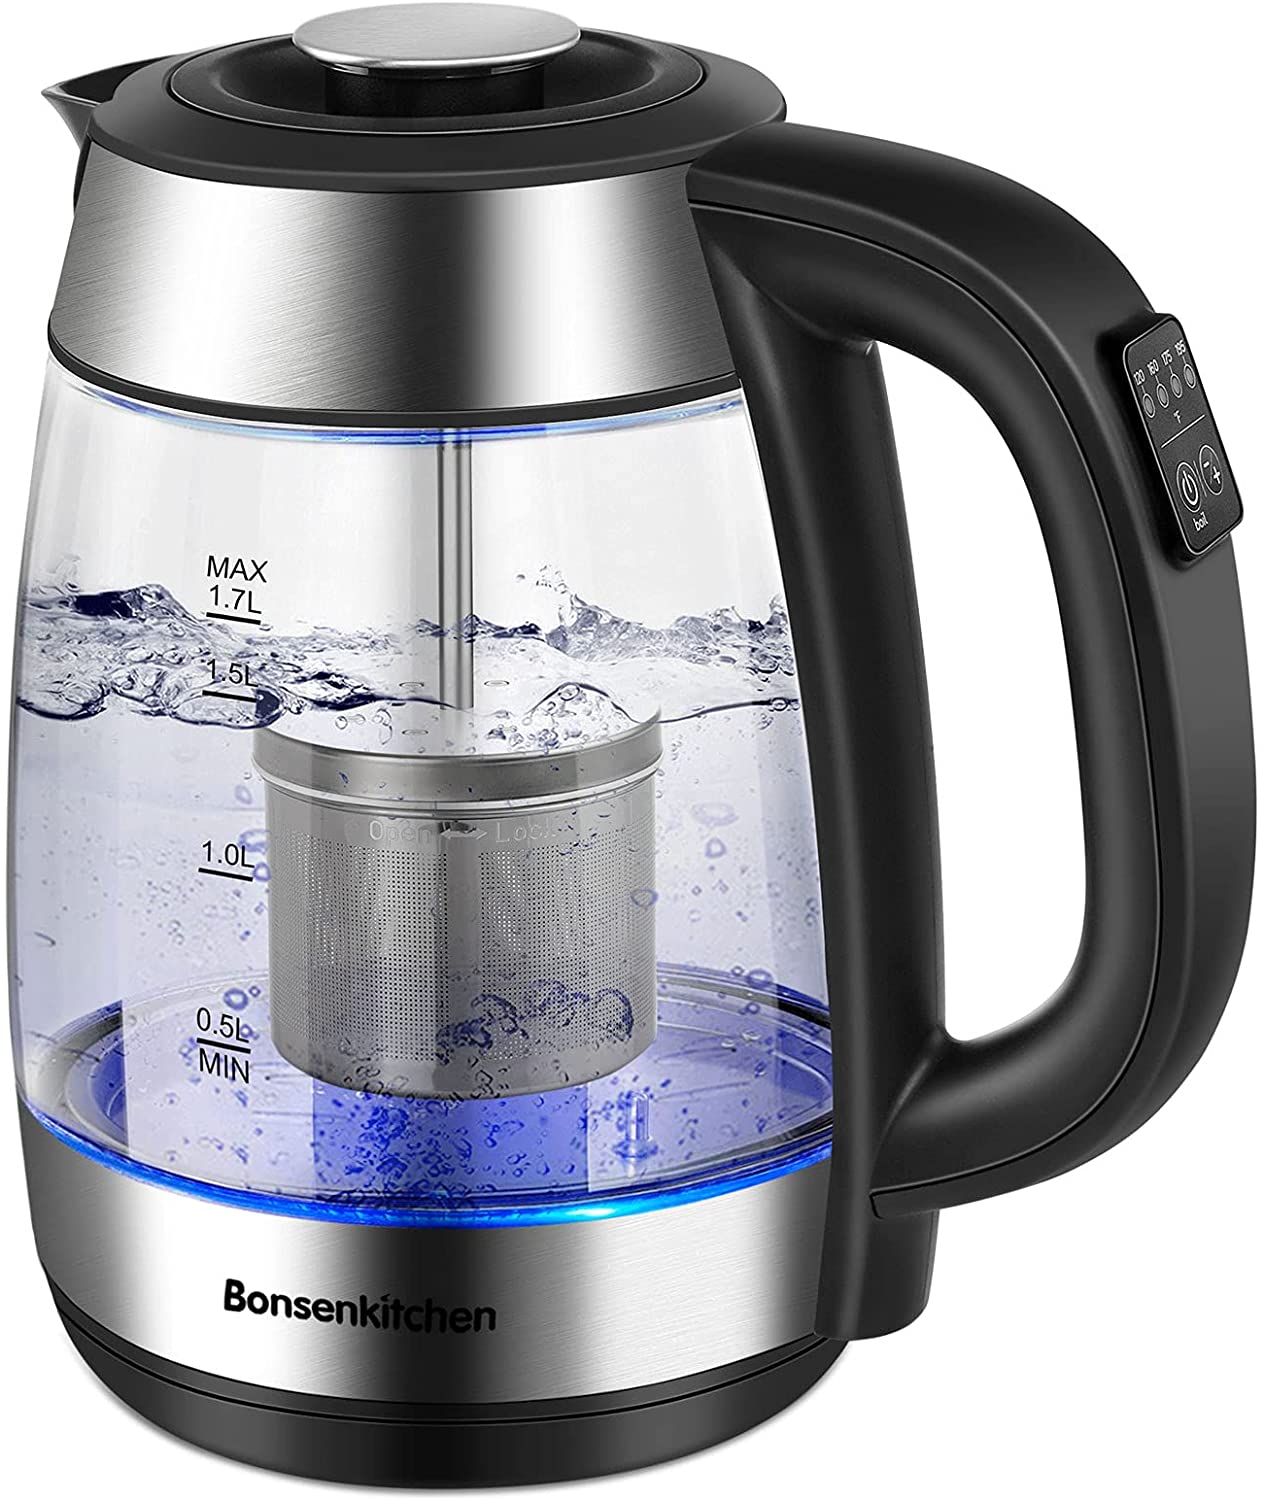 Bonsenkitchen Electric Kettles with Tea Infuser